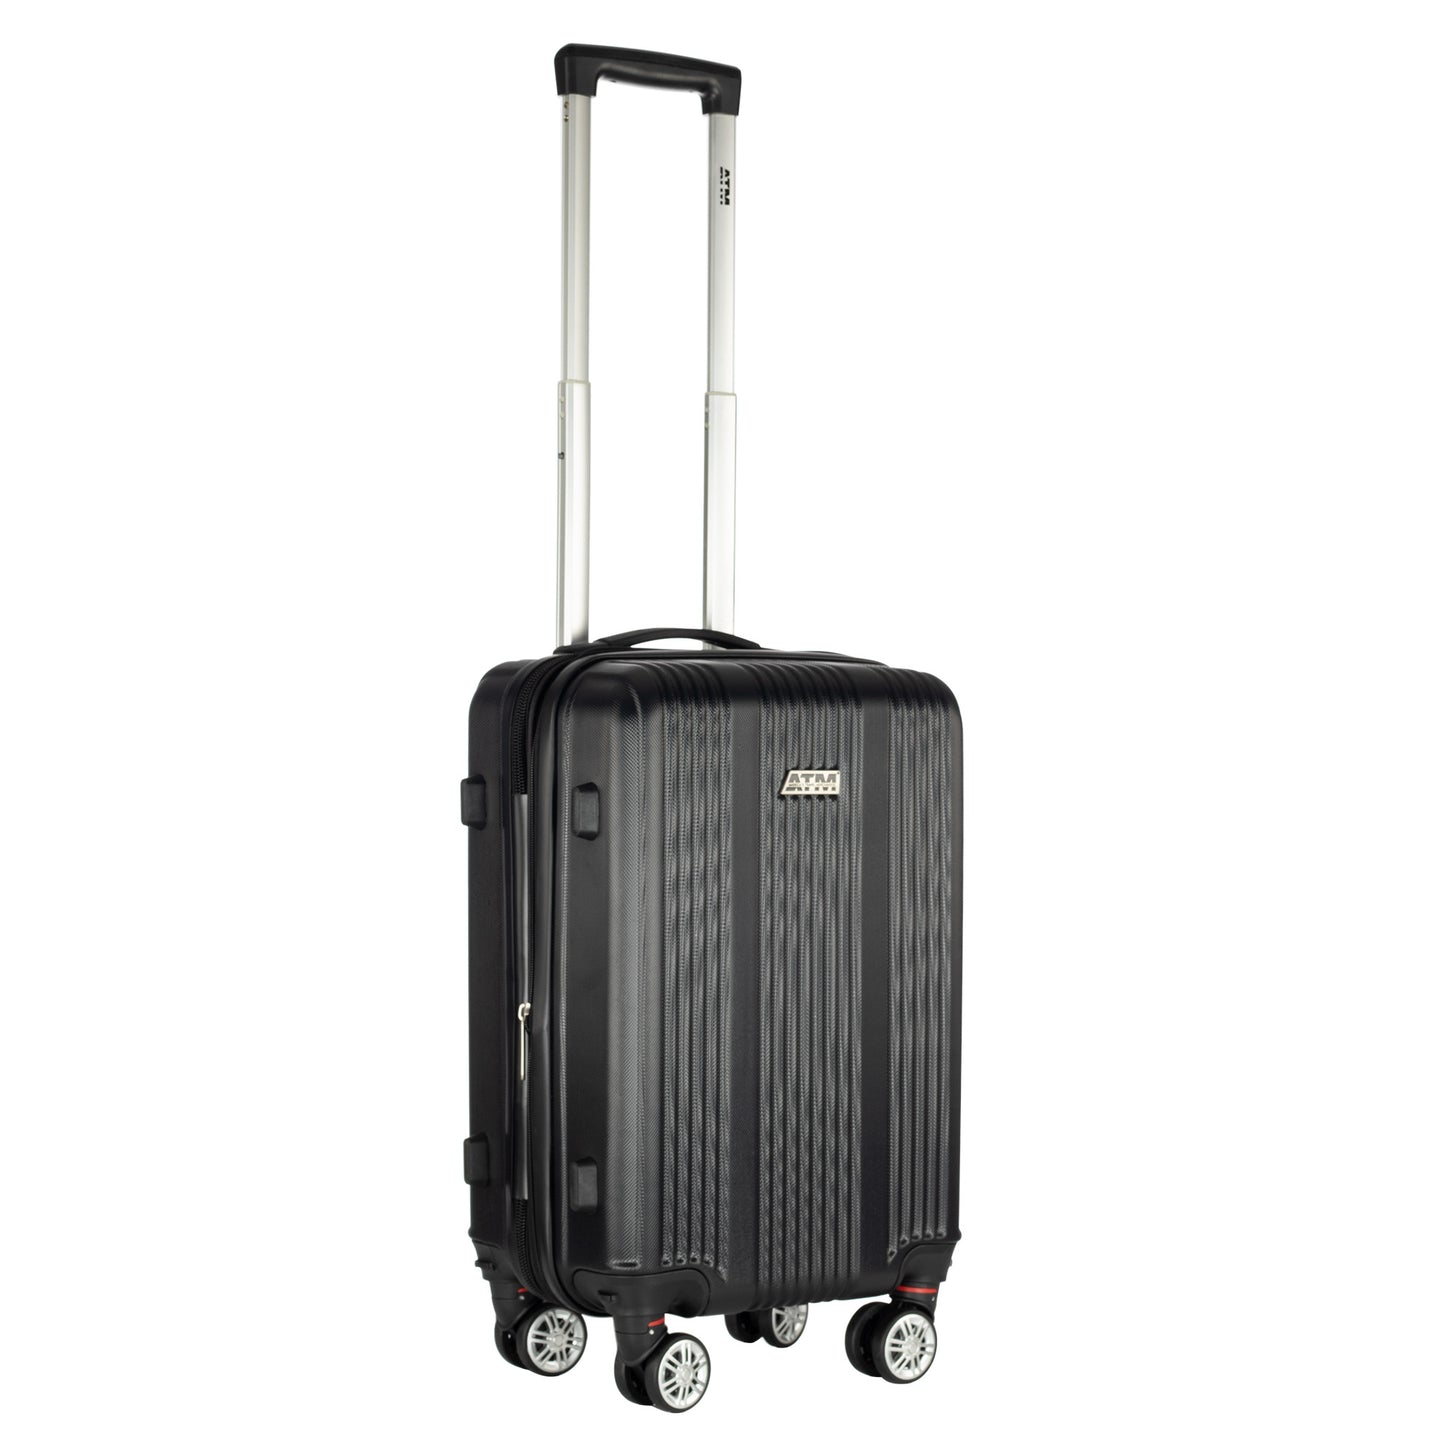 Hardhead Luggage 4 Piece Set (18/19/20/21")  Tactic Collection Black For Airplane Cabin